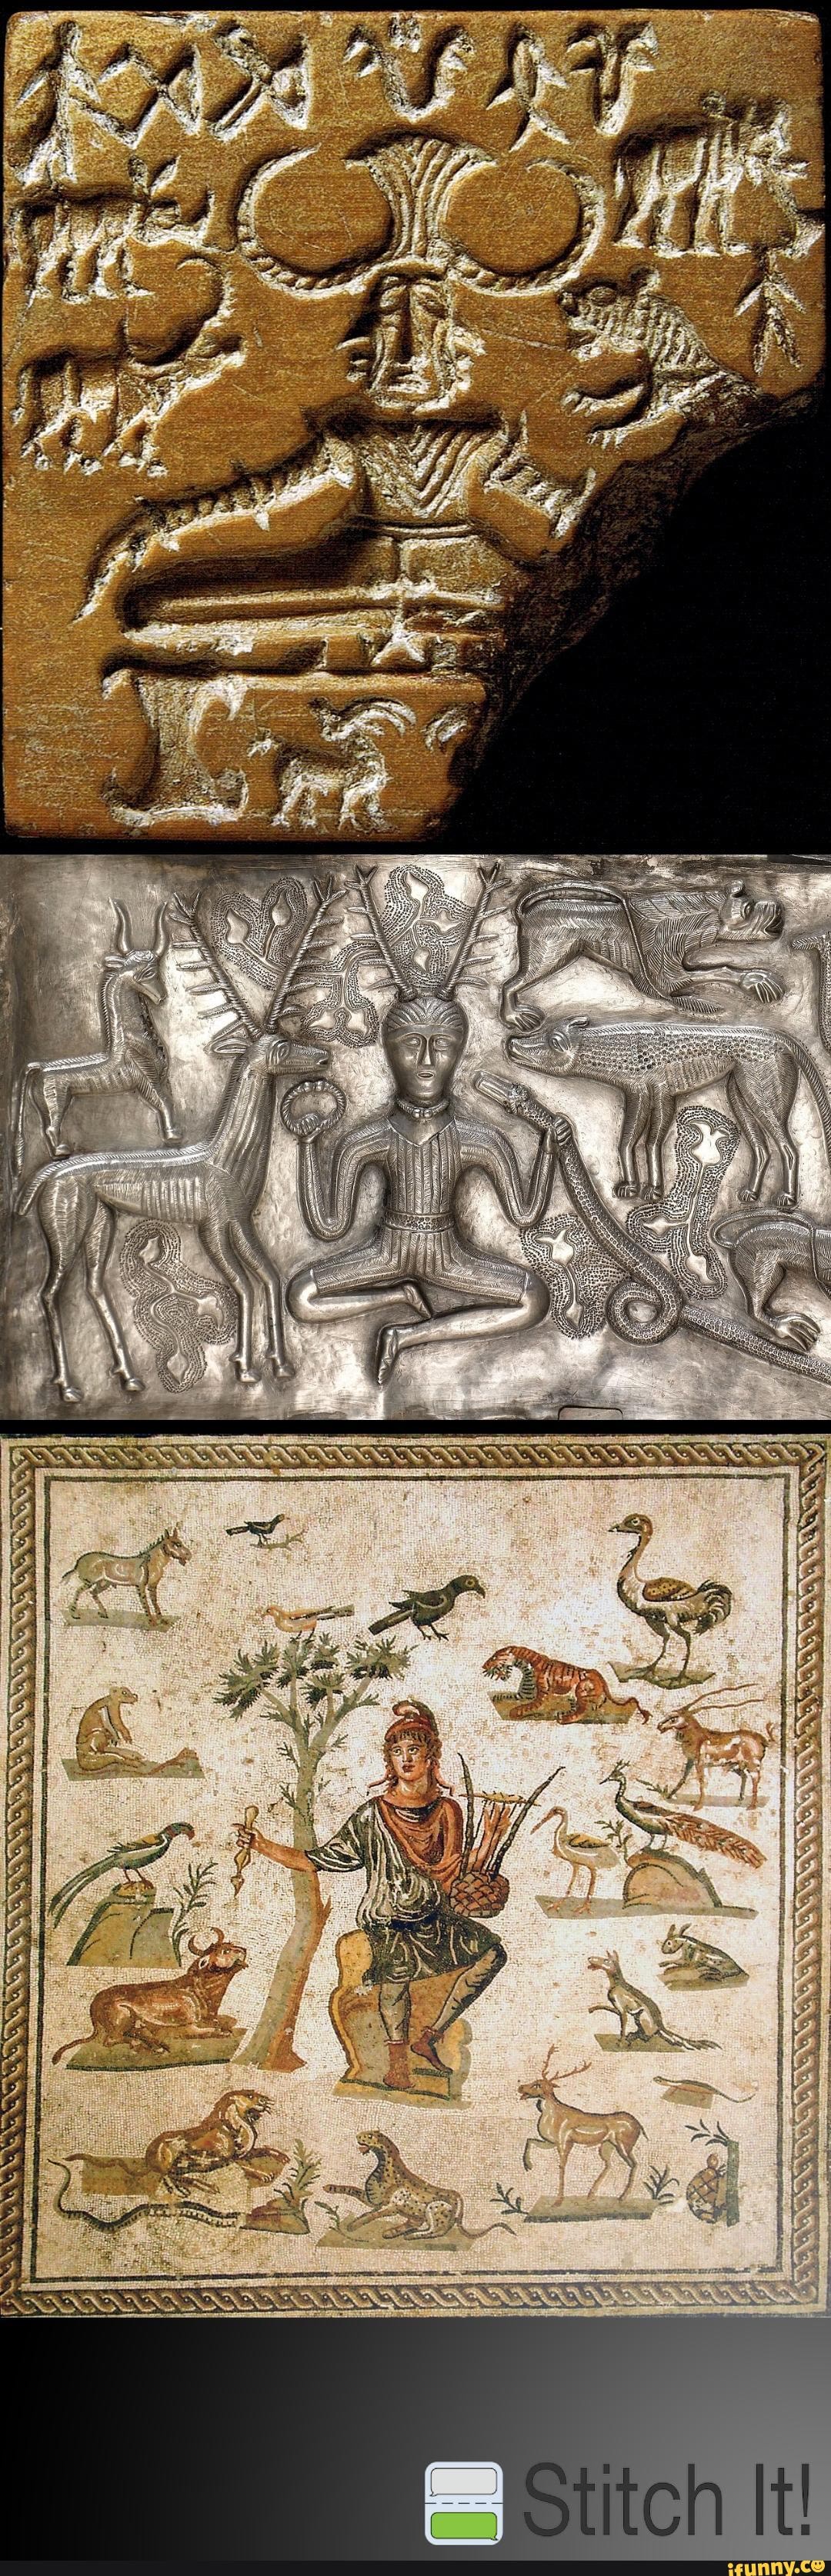 Top is the pashupati seal Mid is cernunanos depicted on a cylinder seal  Bottom orpheus (an avatar of dionysus, the Grecian horned god) 